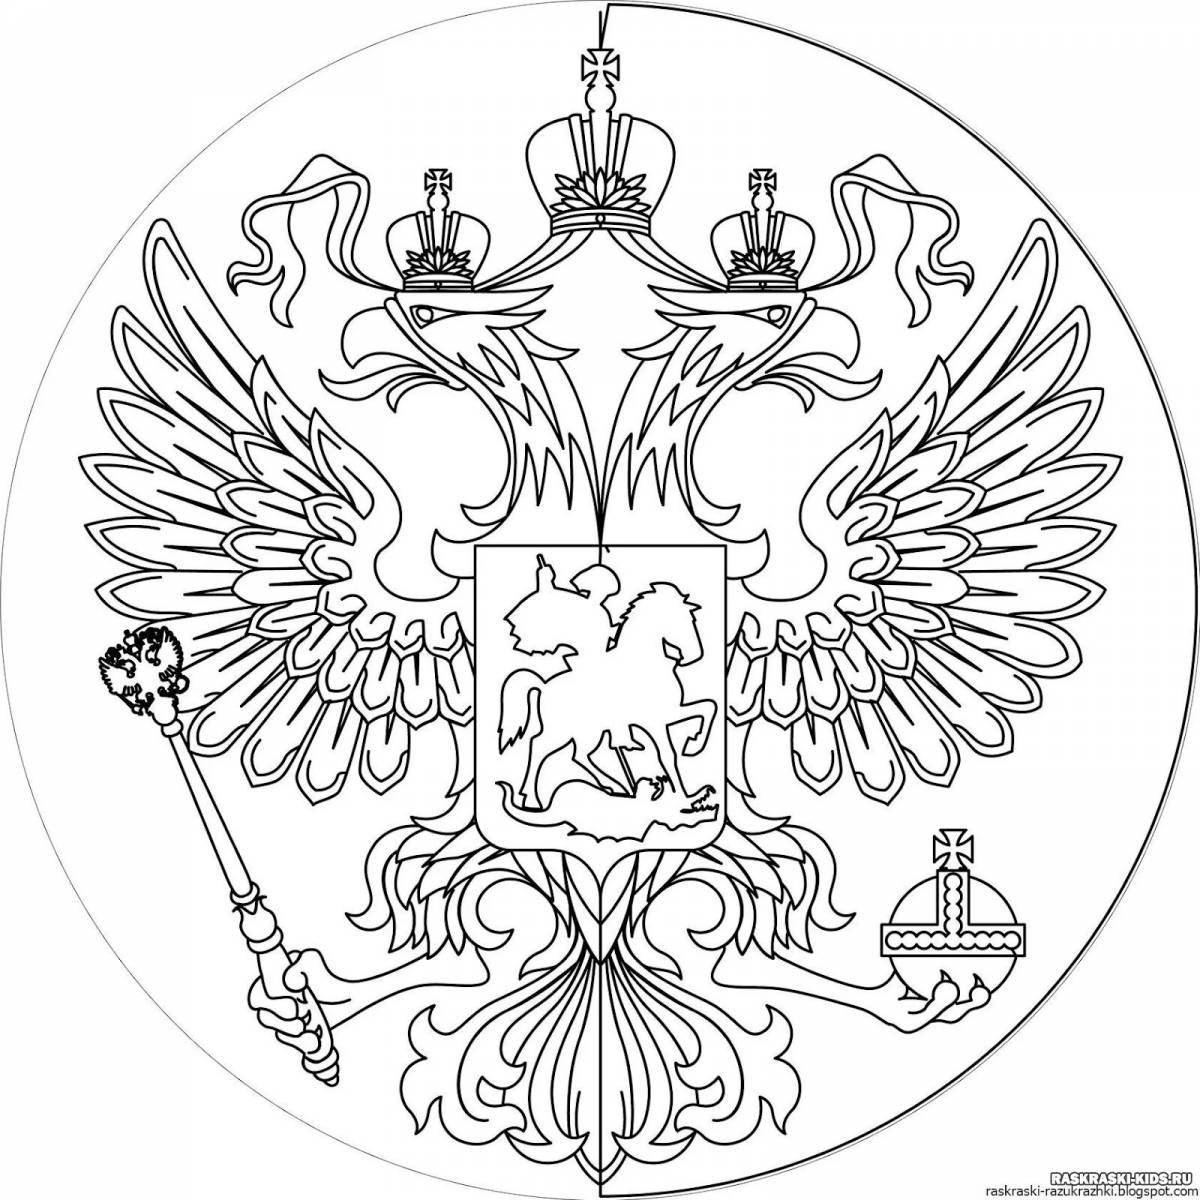 Radiant coat of arms of Russia for preschoolers